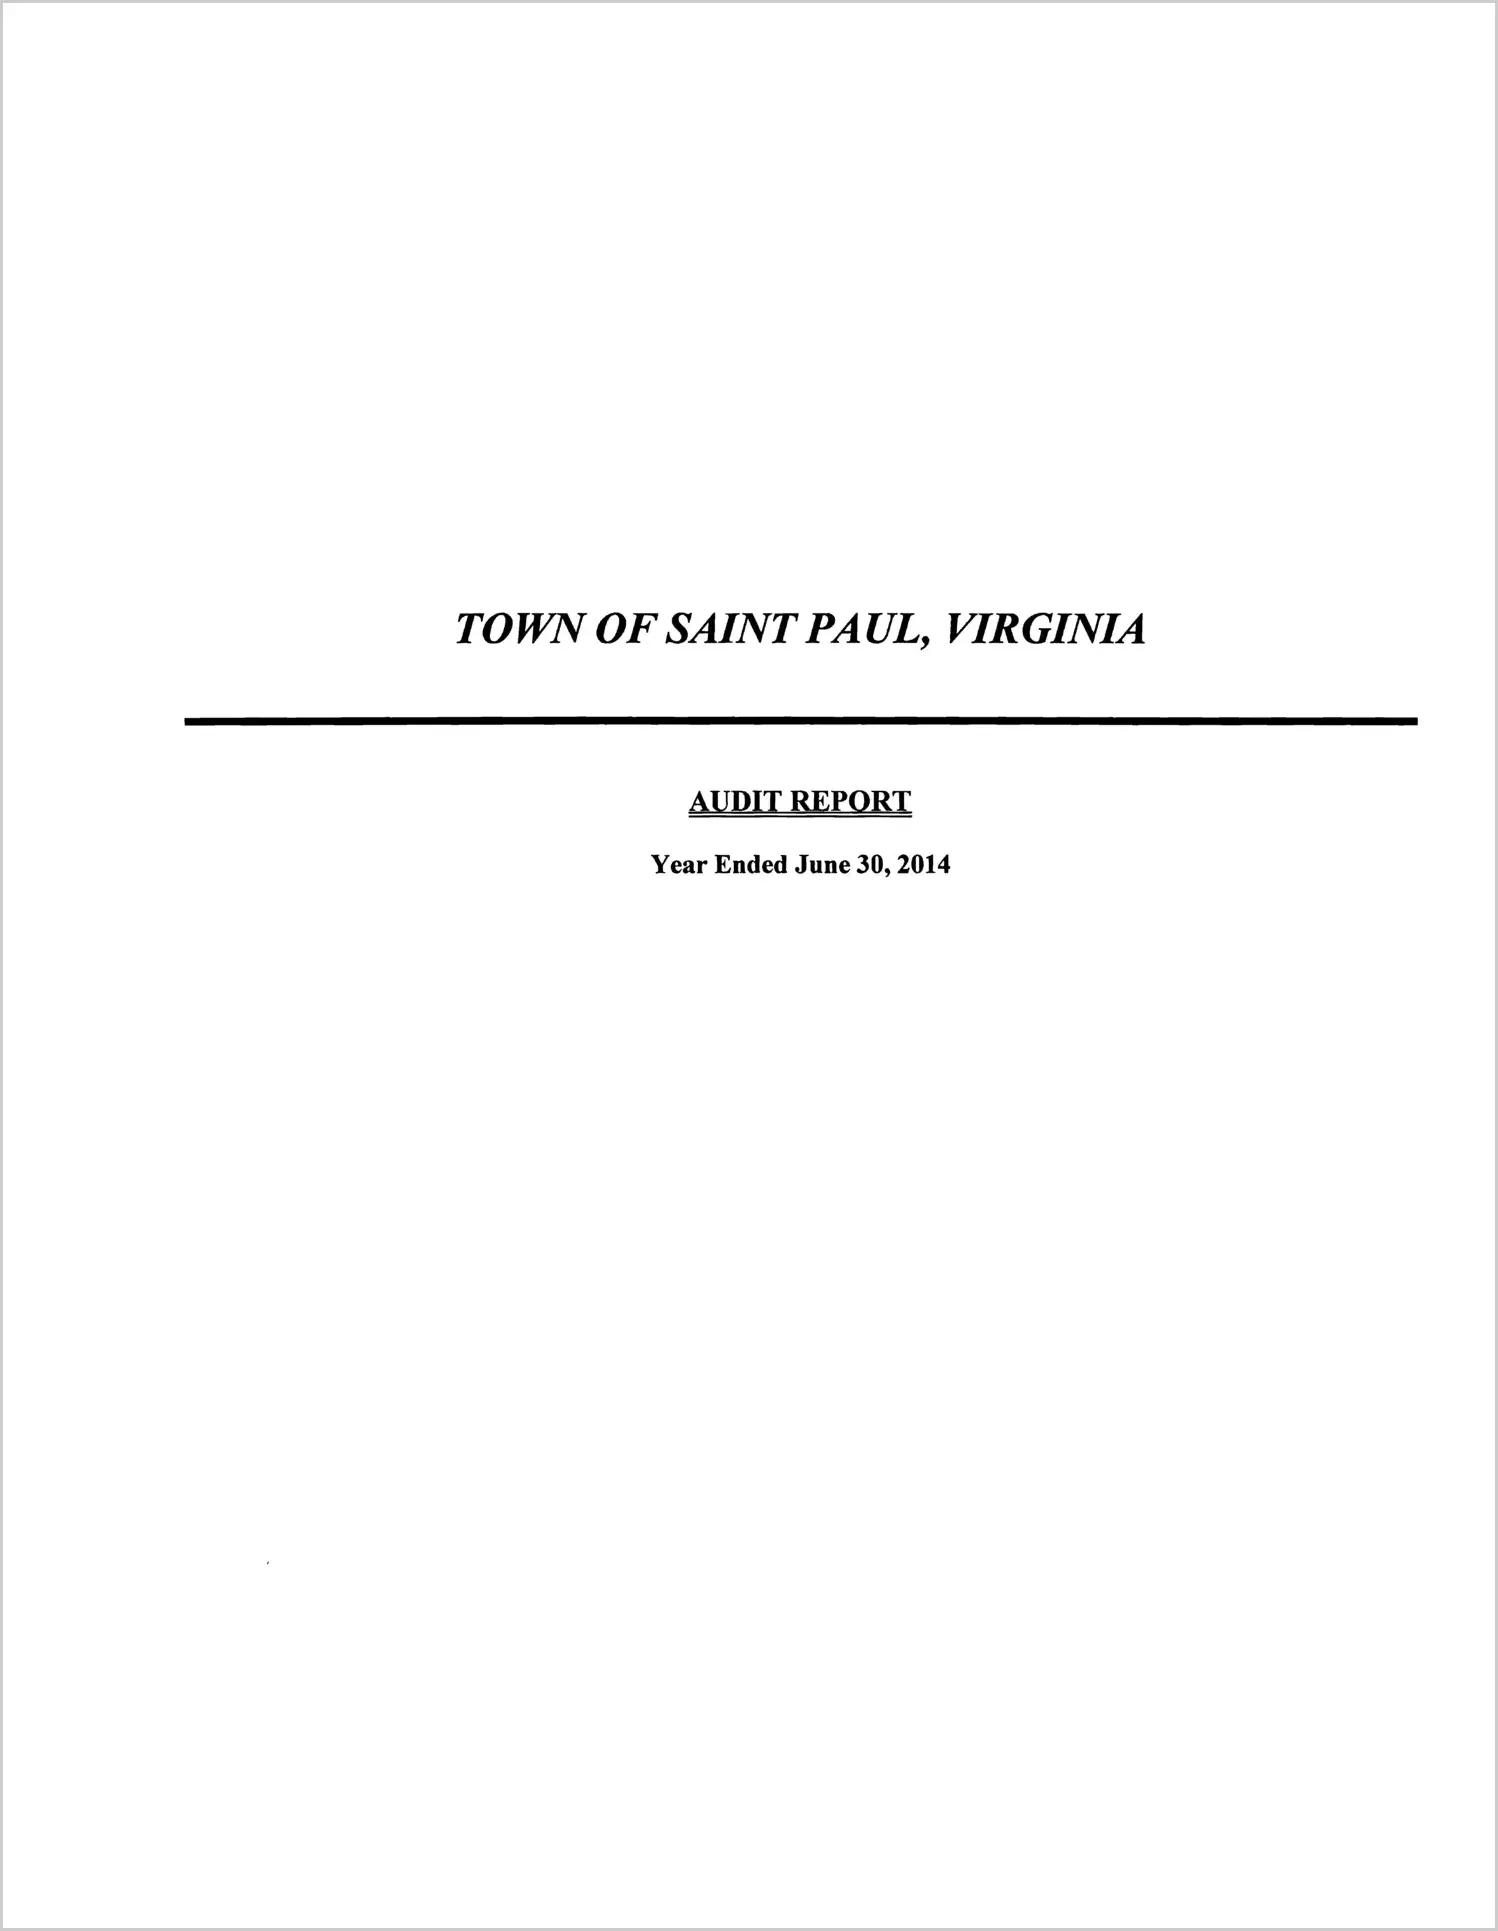 2014 Annual Financial Report for Town of Saint Paul